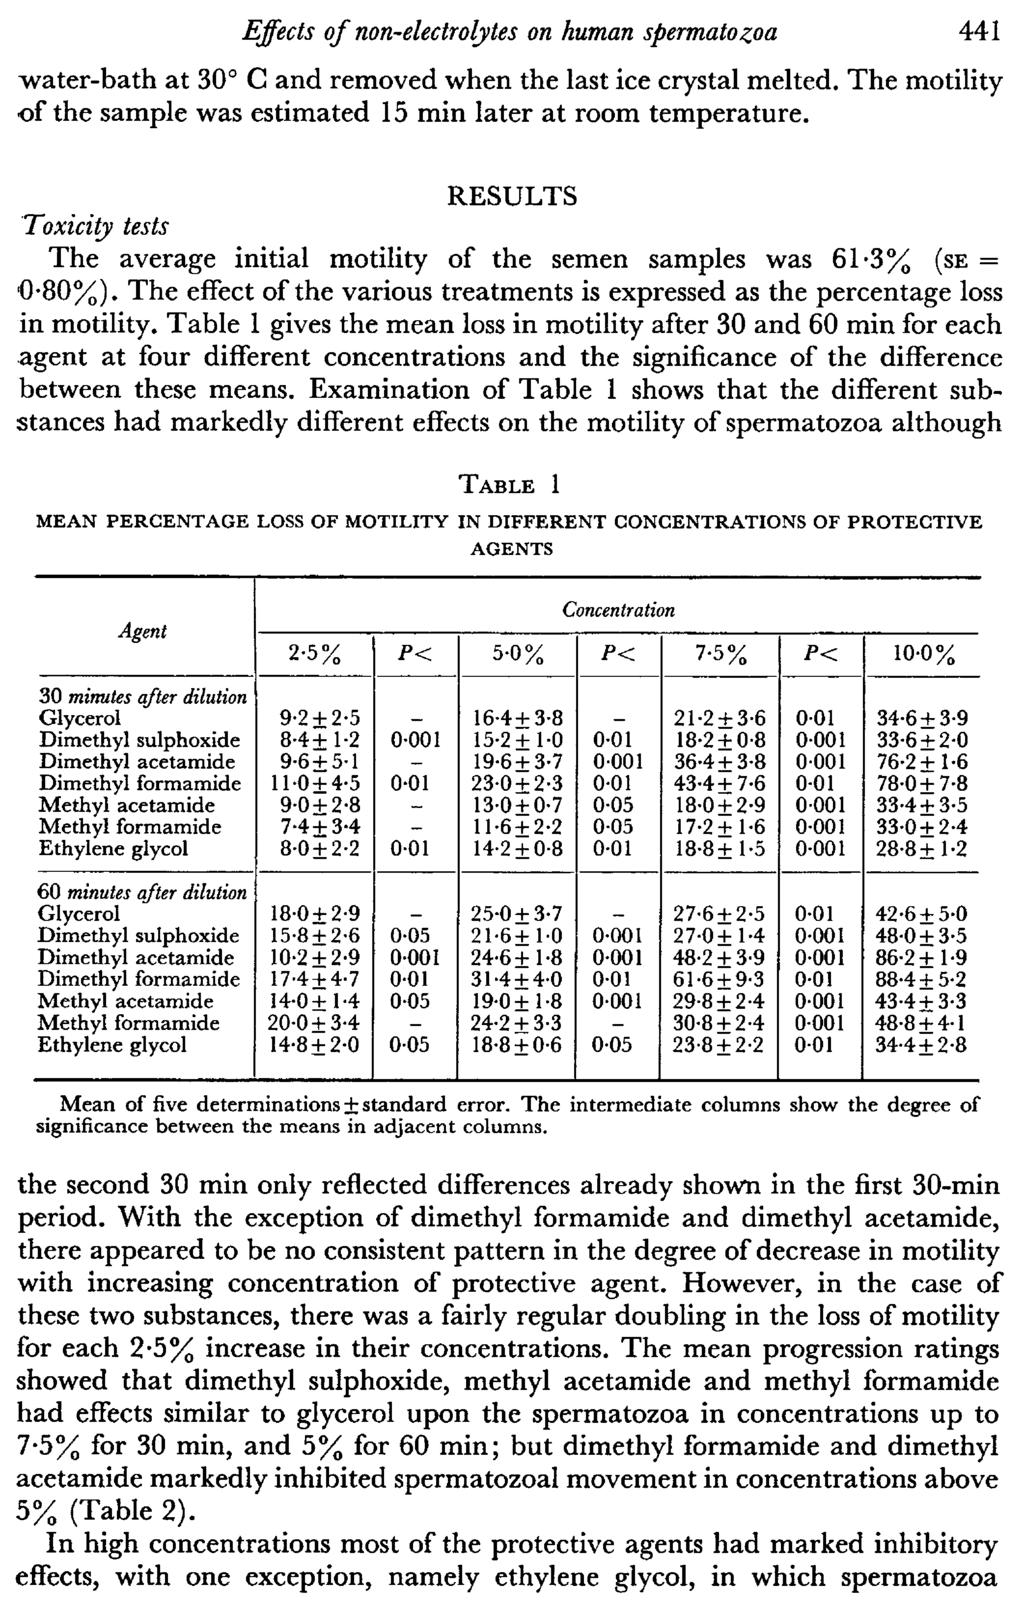 Effects of non-electrolytes on human spermatozoa 441 water-bath at 30 C and removed when the last ice crystal melted. The motility of the sample was estimated 15 min later at room temperature.